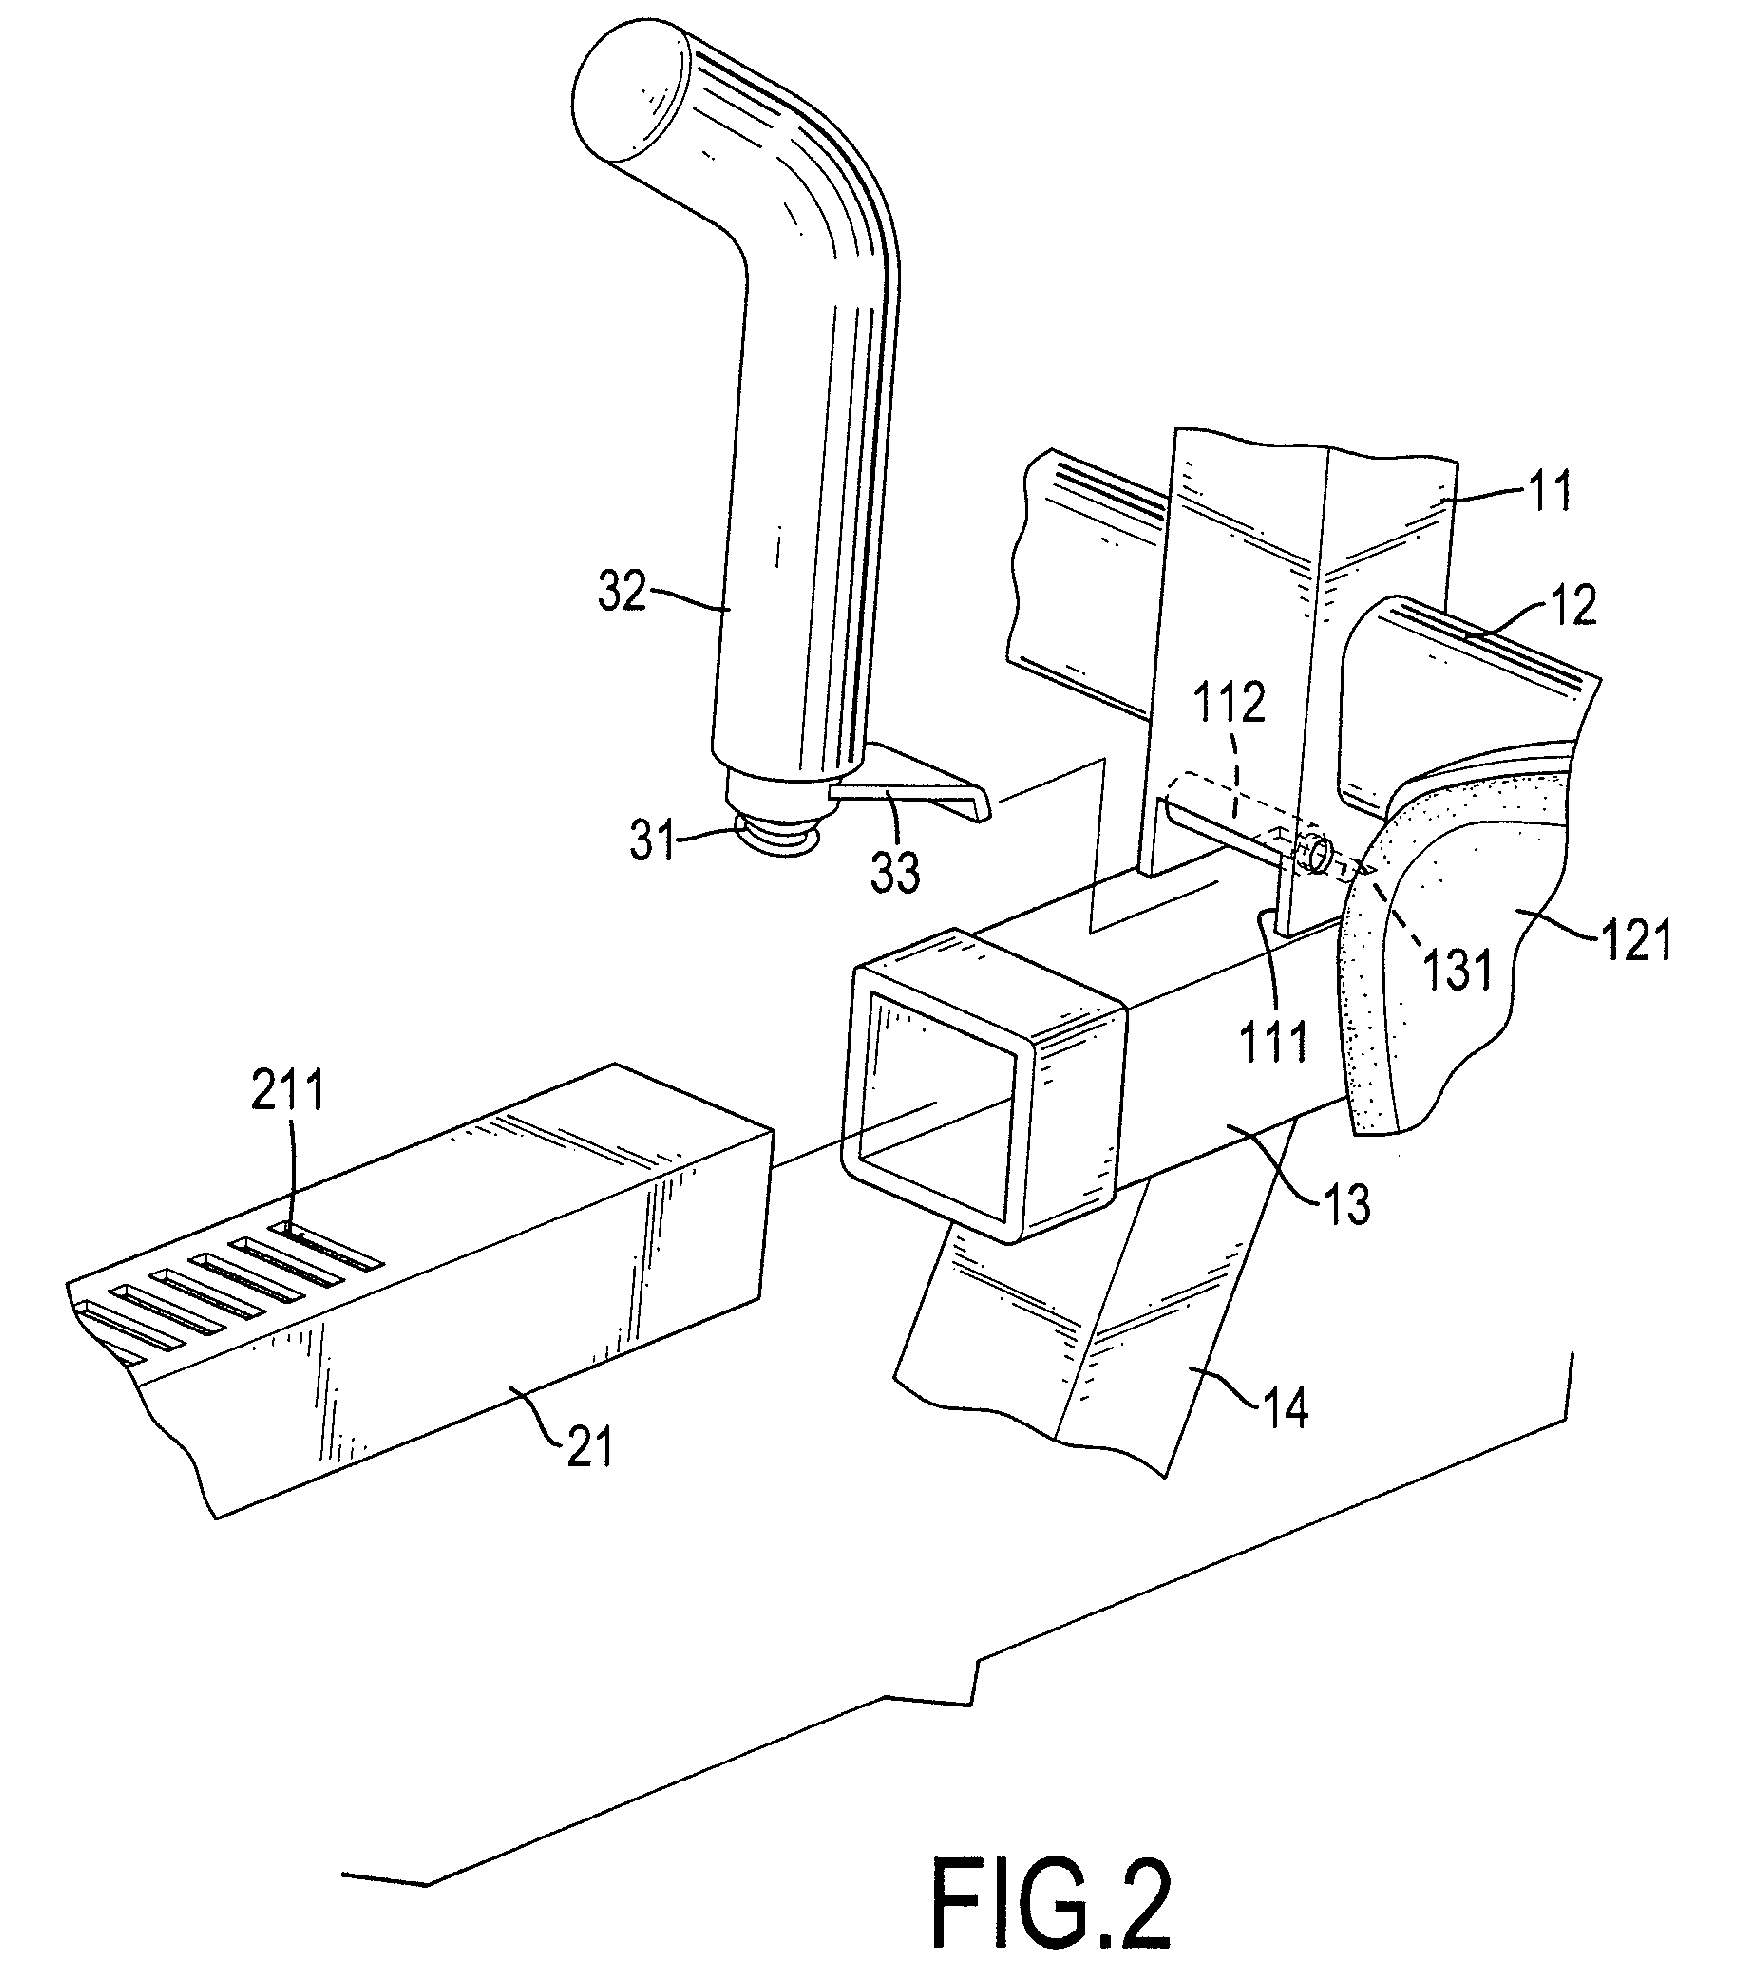 Ankle clamp assembly for an inversion table